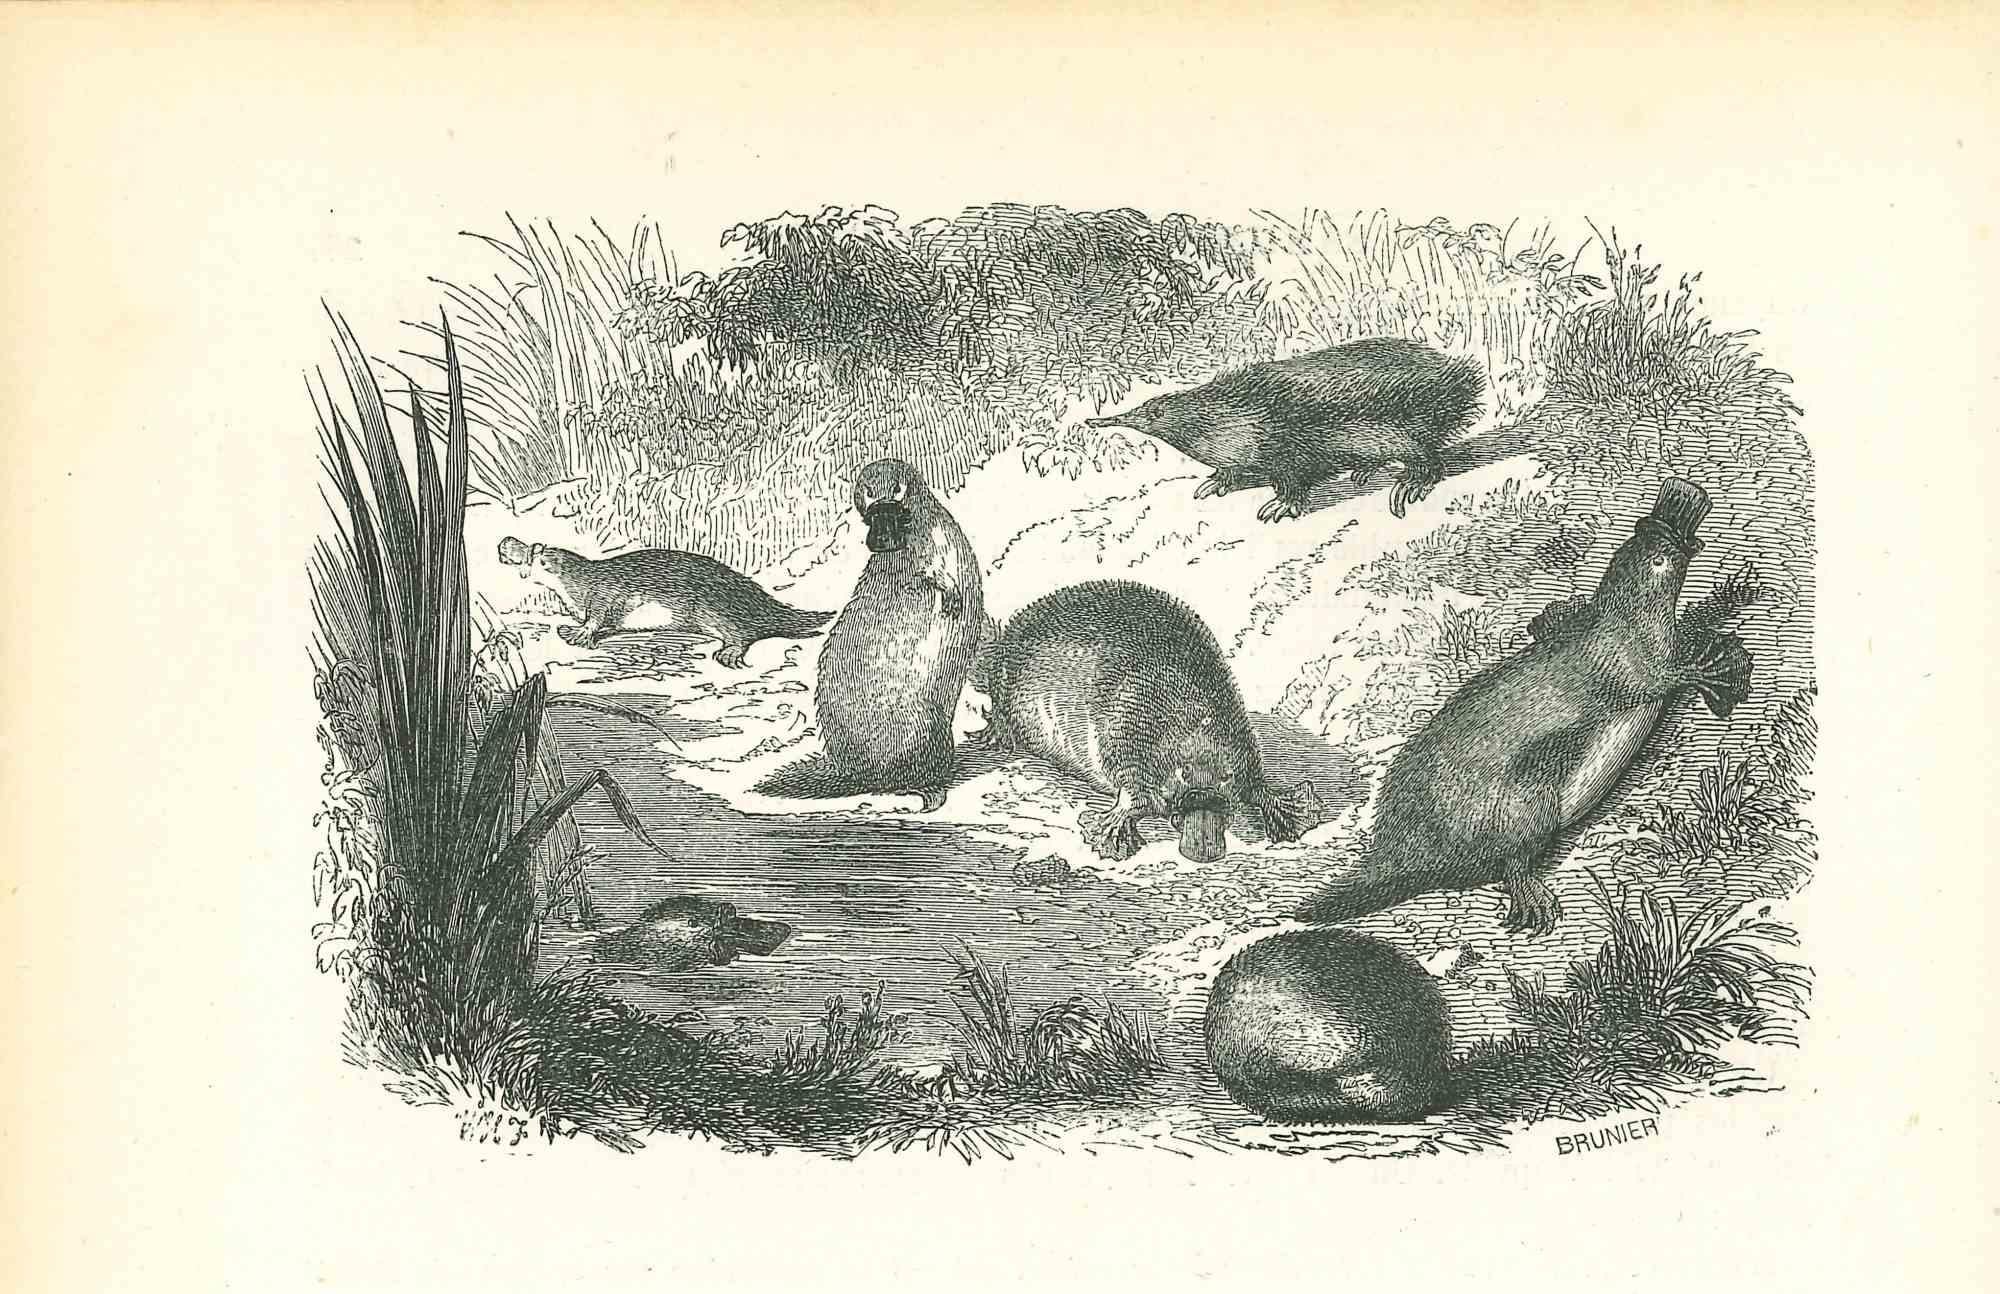 Animals On The Shore is an original lithograph on ivory-colored paper, realized by Paul Gervais (1816-1879). The artwork is from The Series of "Les Trois Règnes de la Nature", and was published in 1854.

Good conditions.

Titled on the lower. With